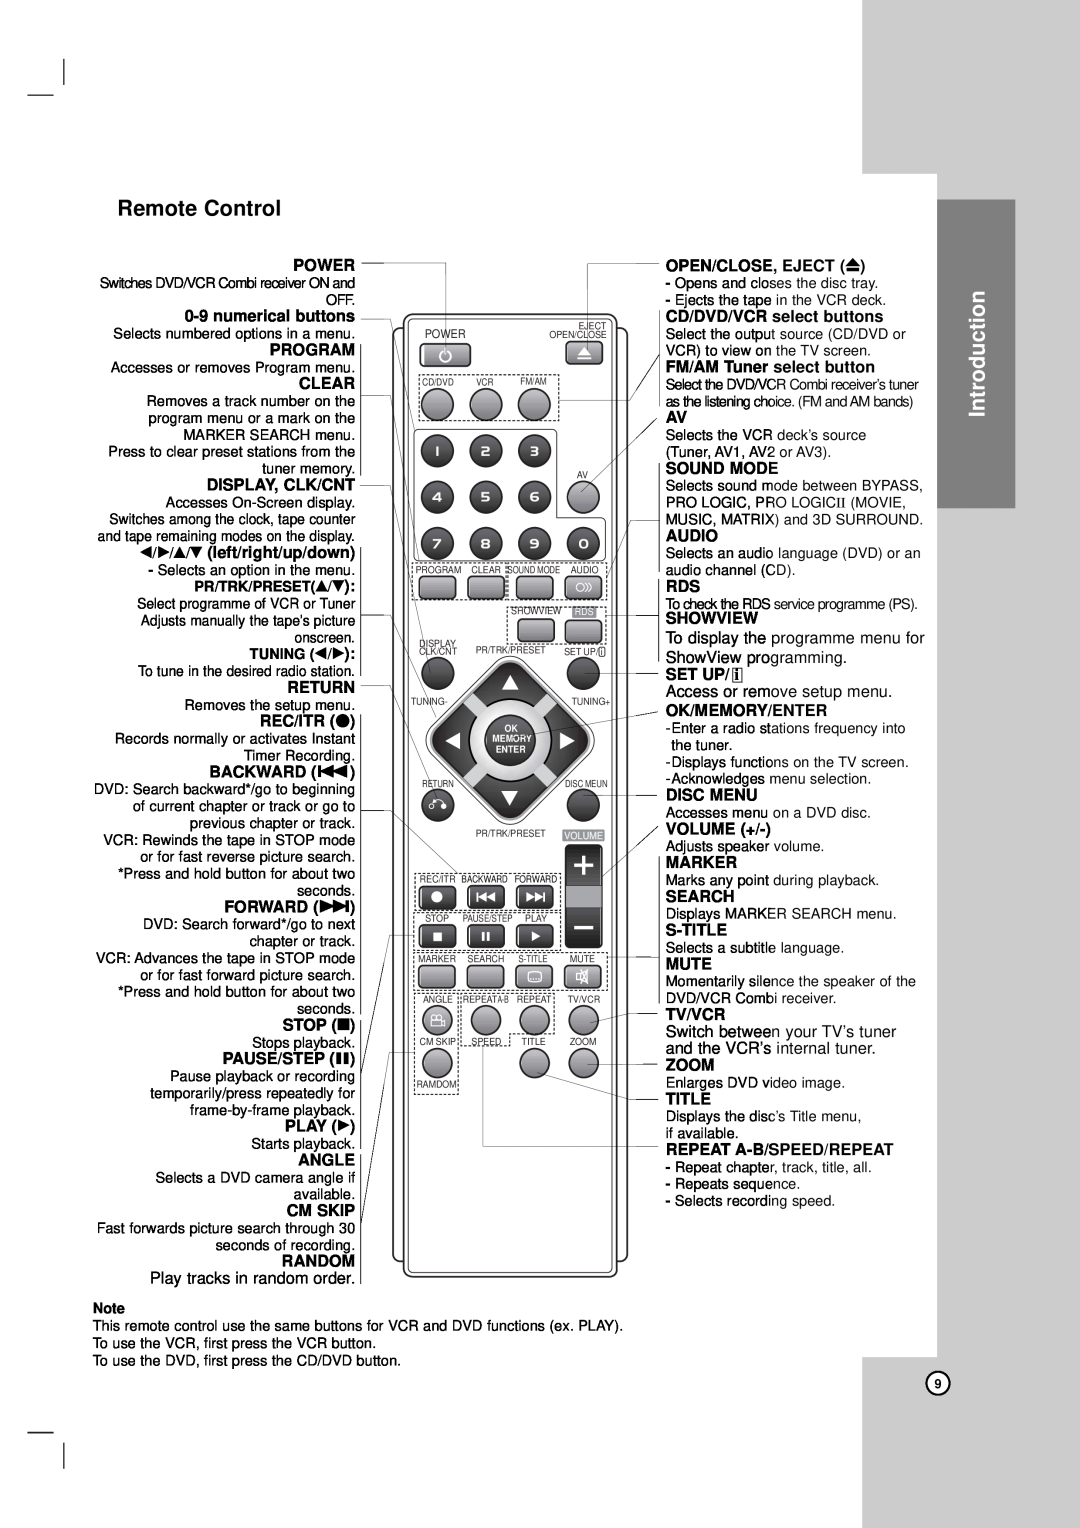 LG Electronics LH-CX245 Remote Control, Introduction, Power, numerical buttons, Program, Clear, Display, Clk/Cnt, Return 